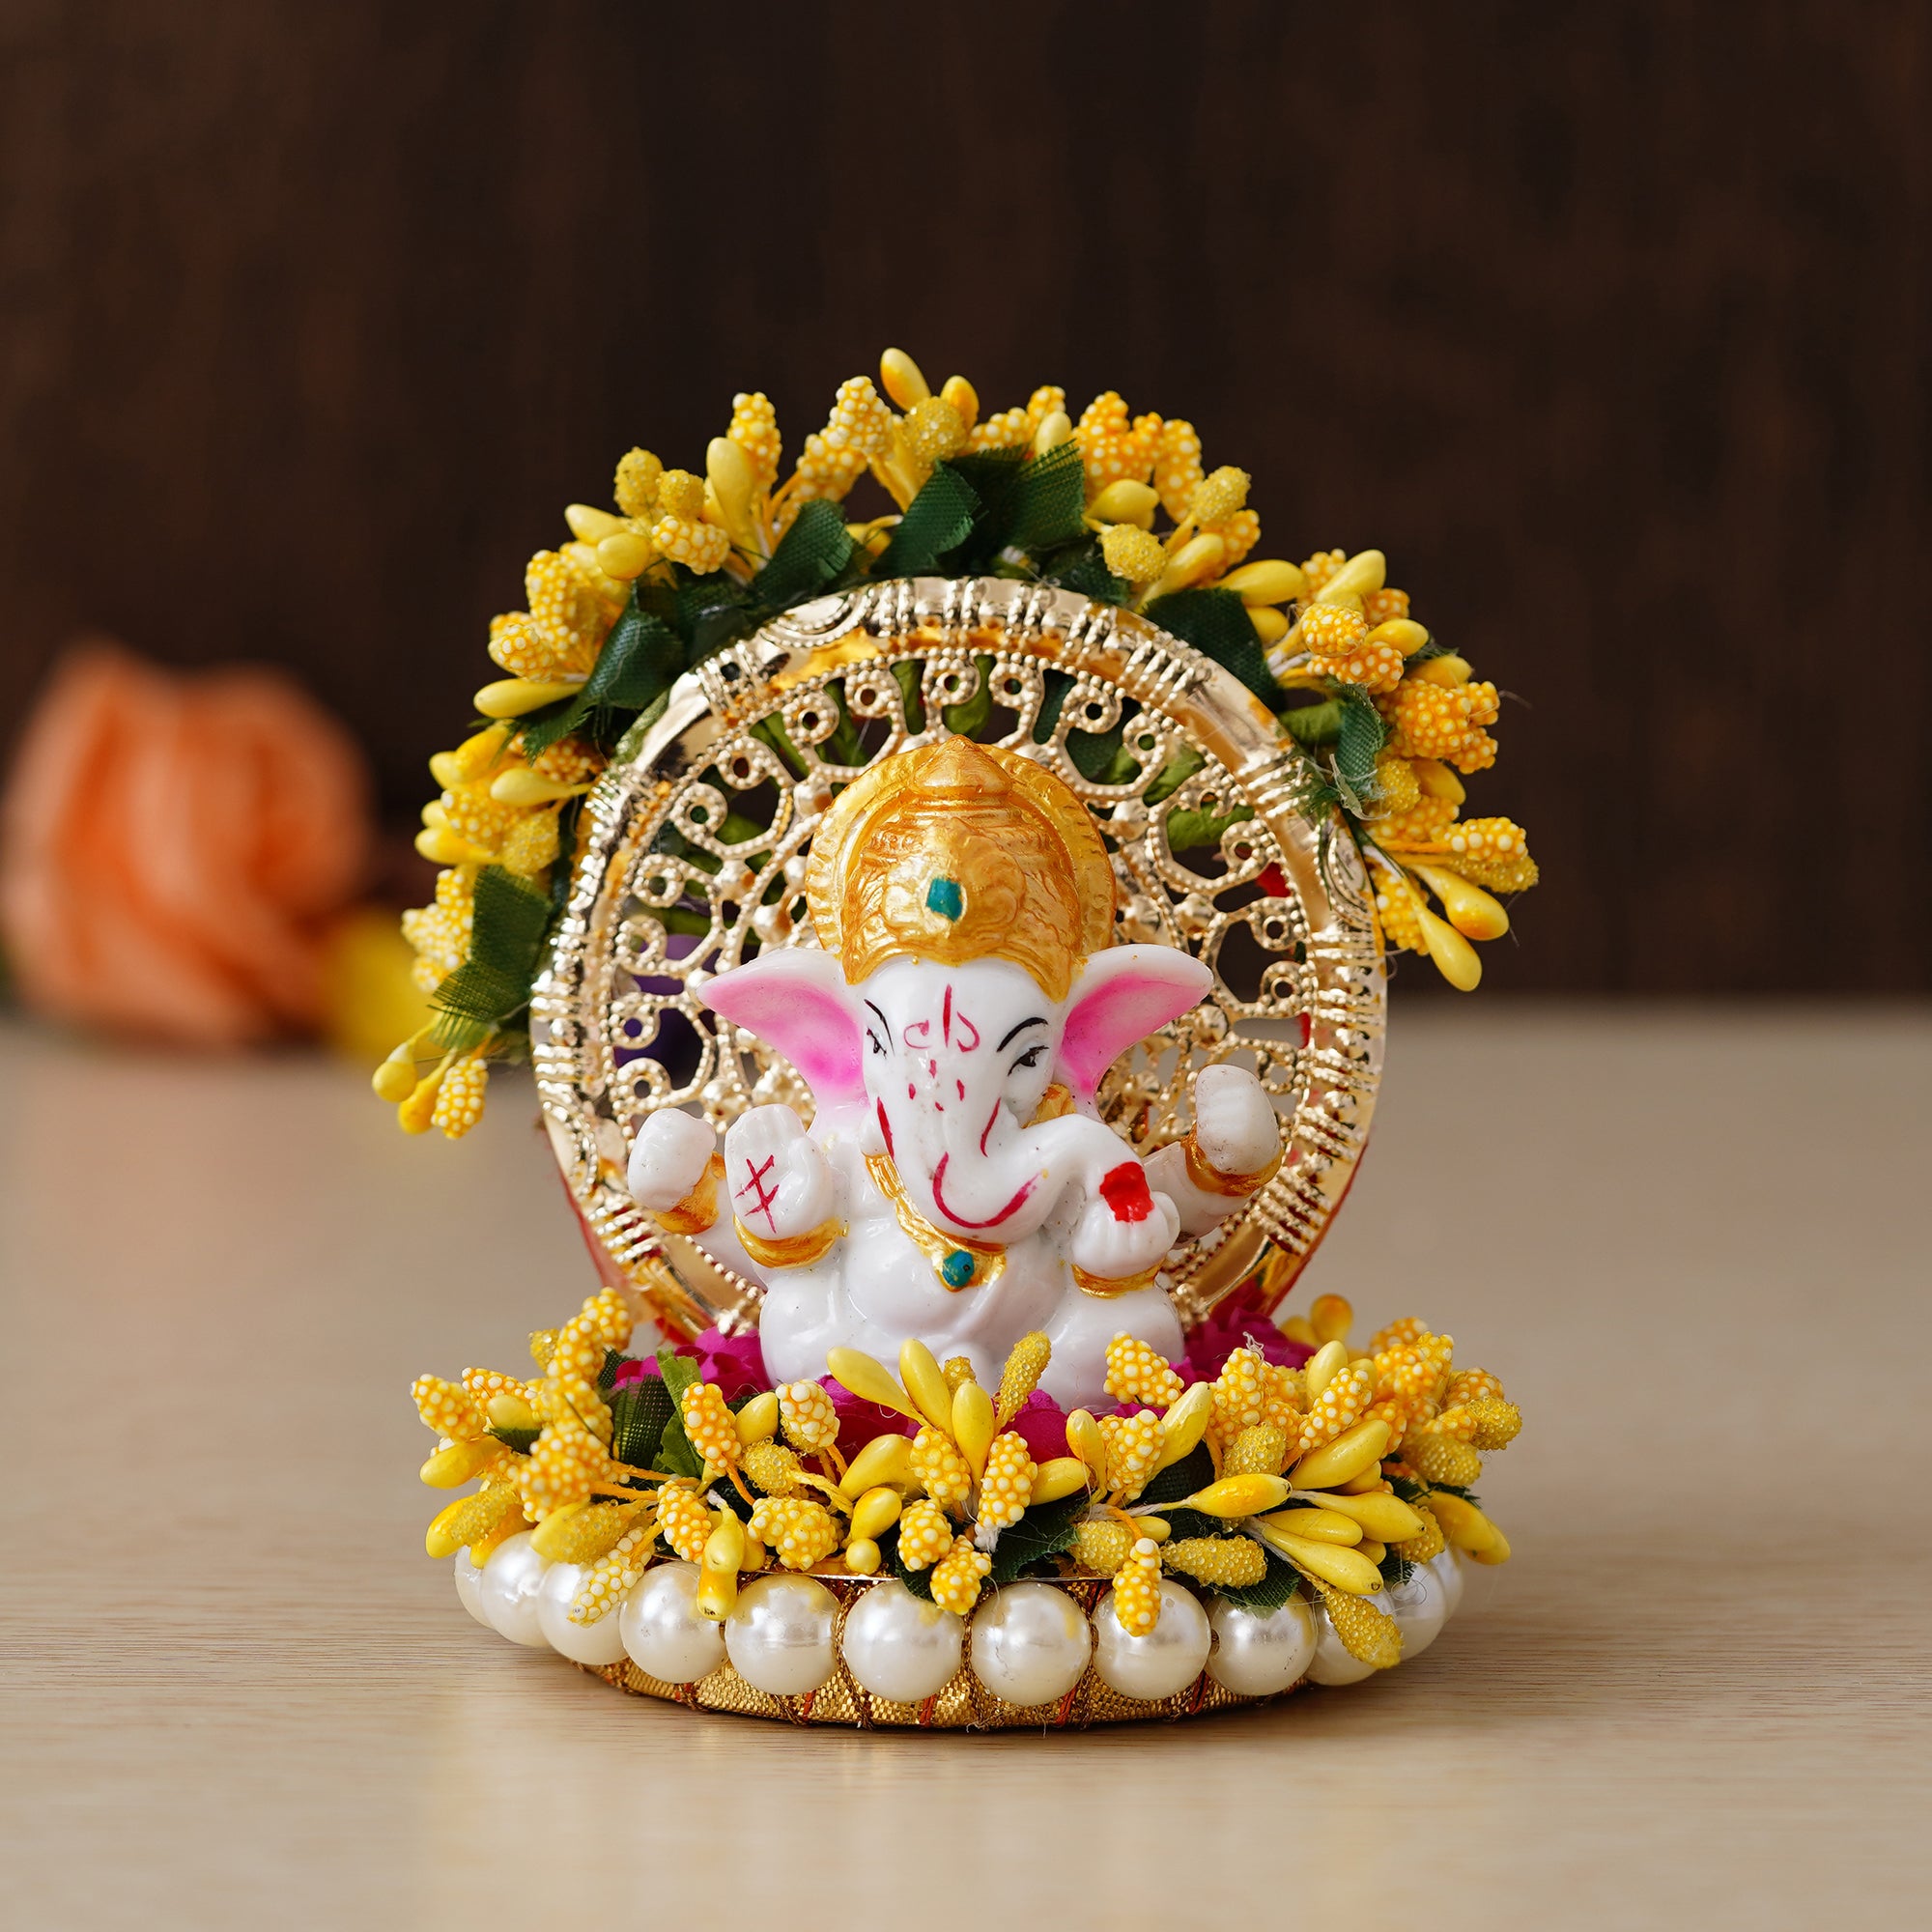 Polyresin Lord Ganesha Idol on Handcrafted Yellow Floral Plate for Home and Car Dashboard